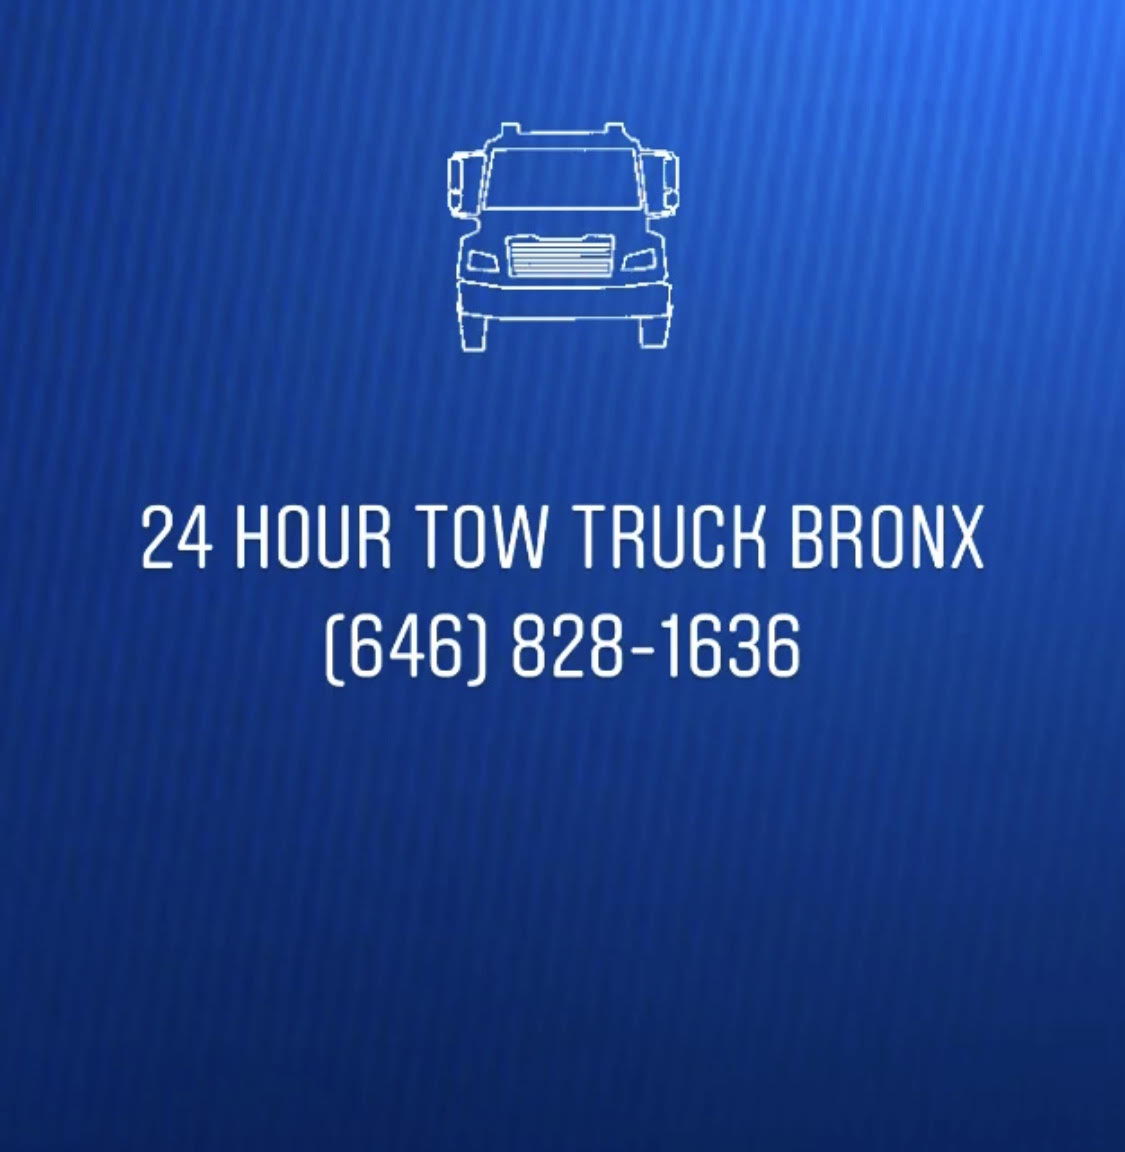 24 Hour Tow Truck Bronx